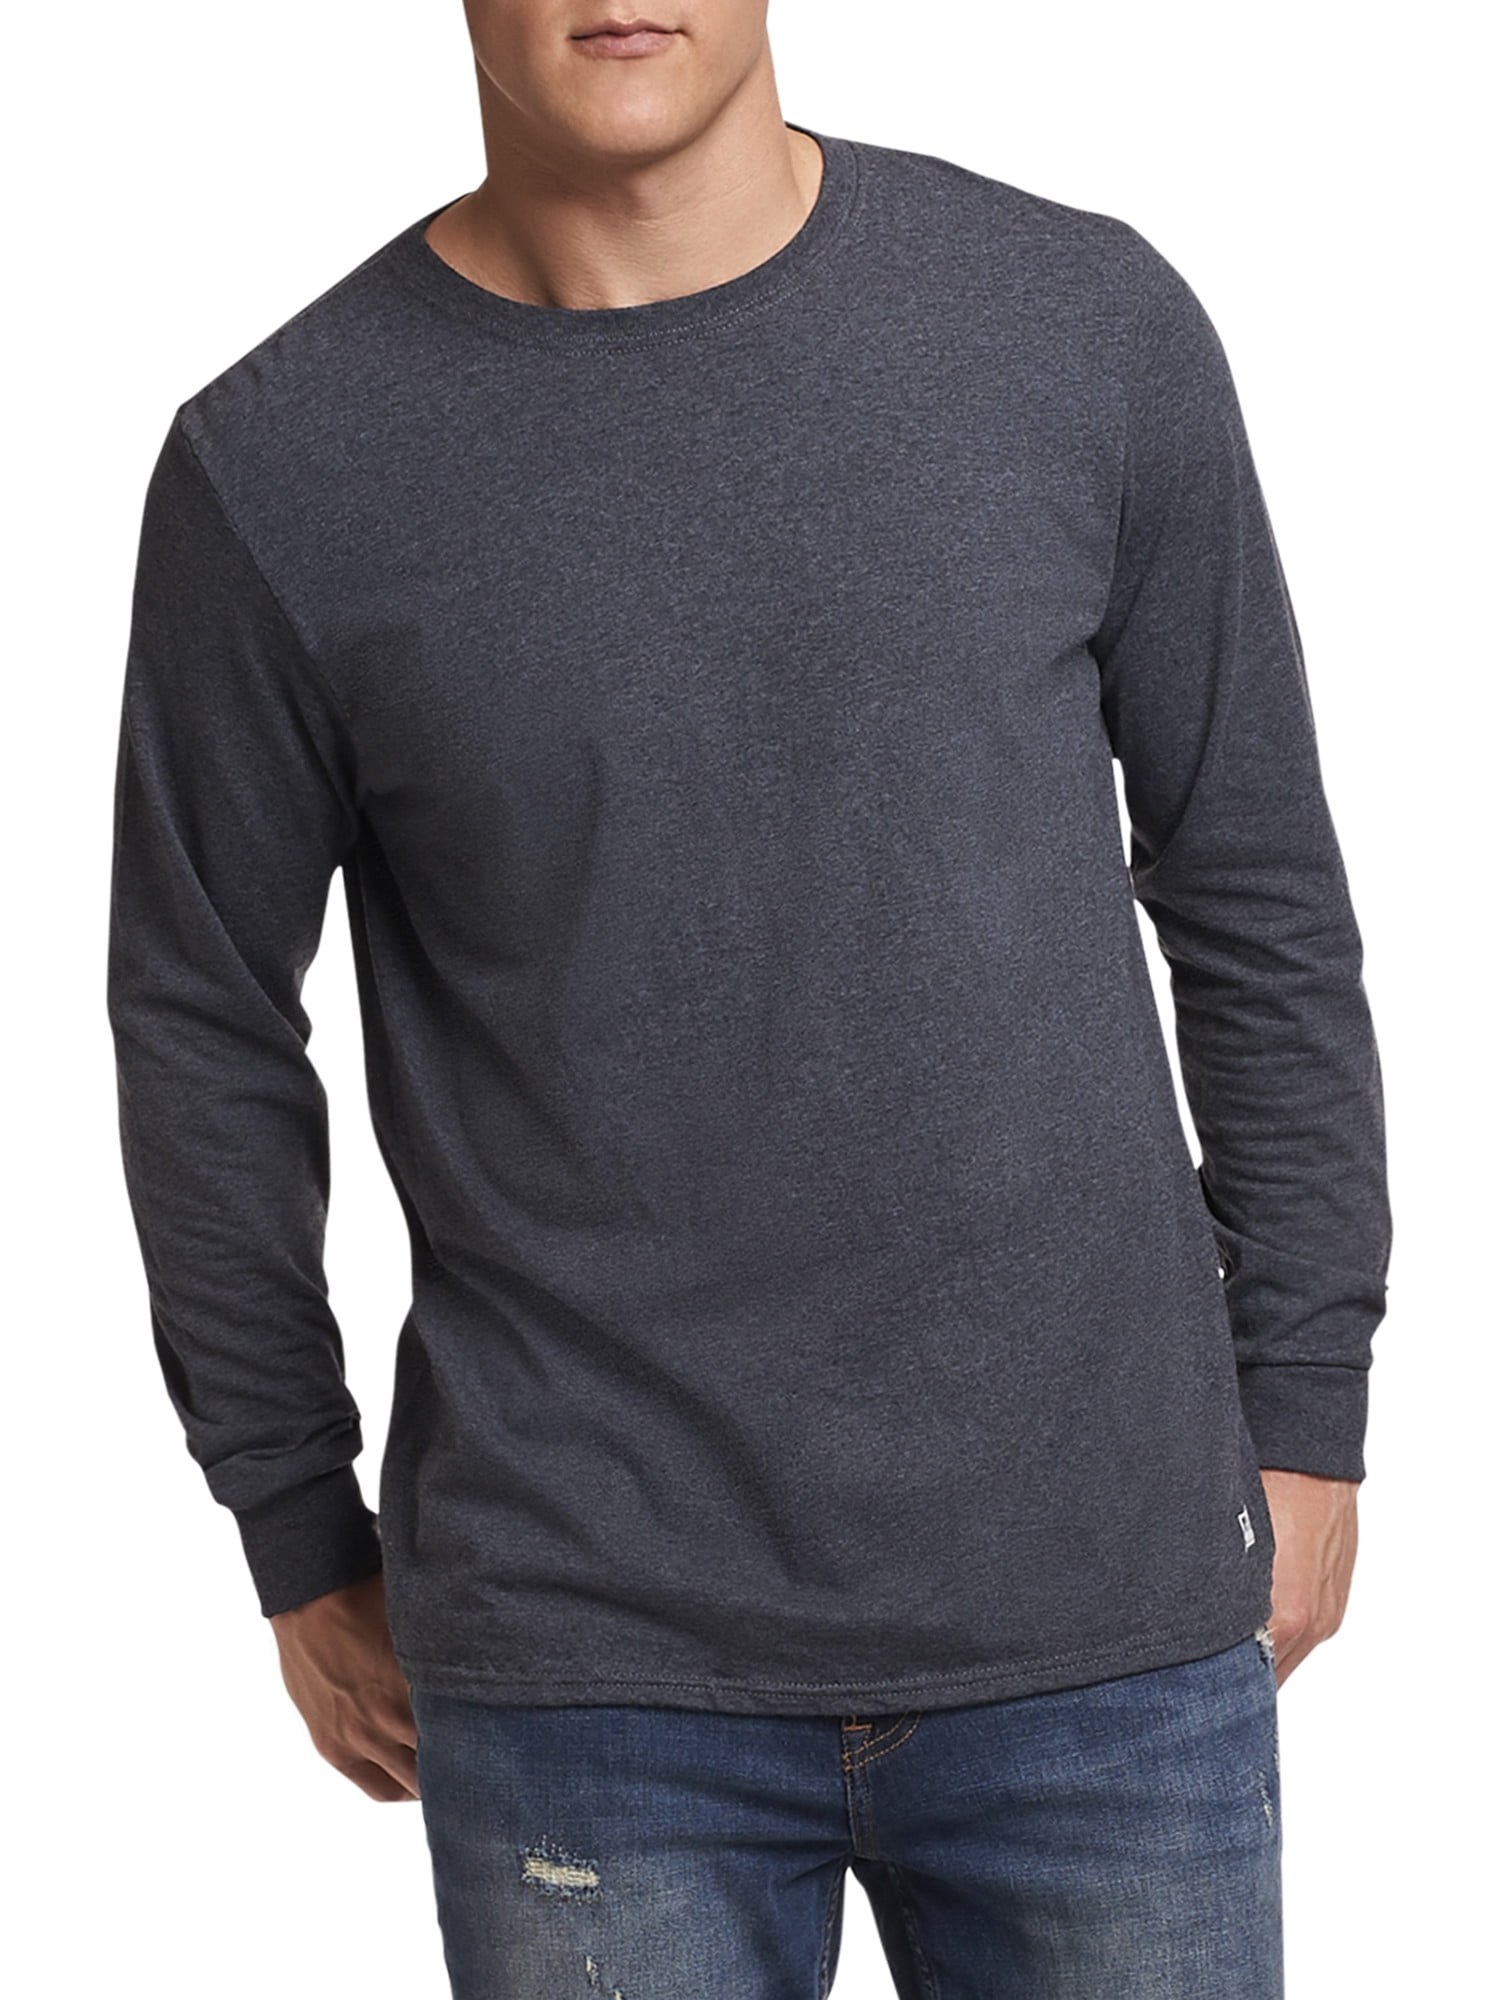 Russell Athletic Men's Cotton Performance Long Sleeve T-Shirt 